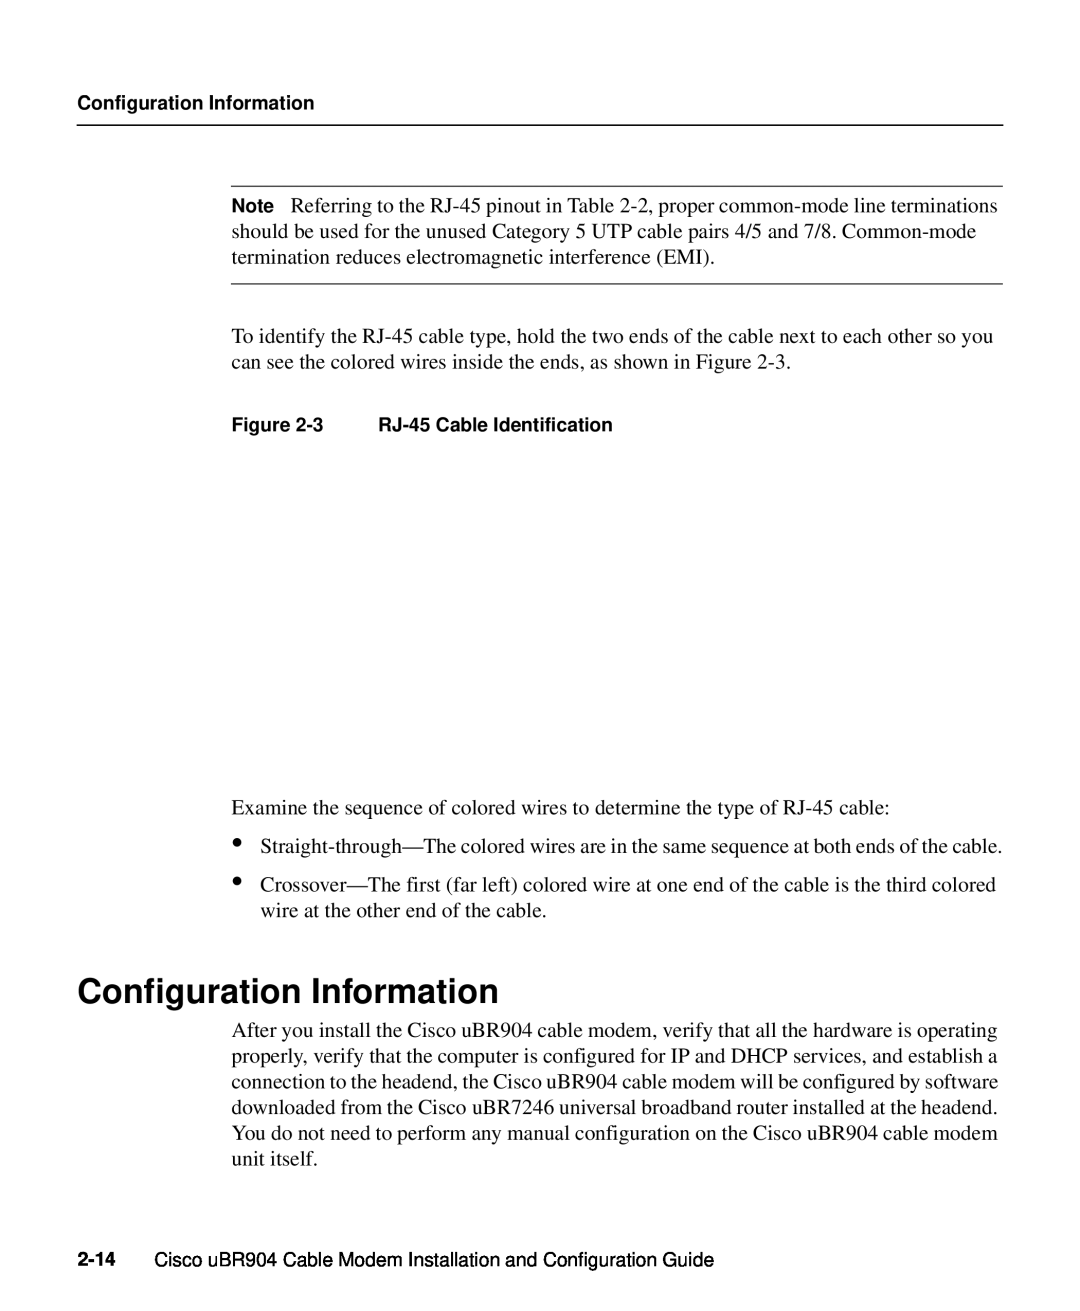 Cisco Systems UBR904 manual Configuration Information, 3 RJ-45 Cable Identification 